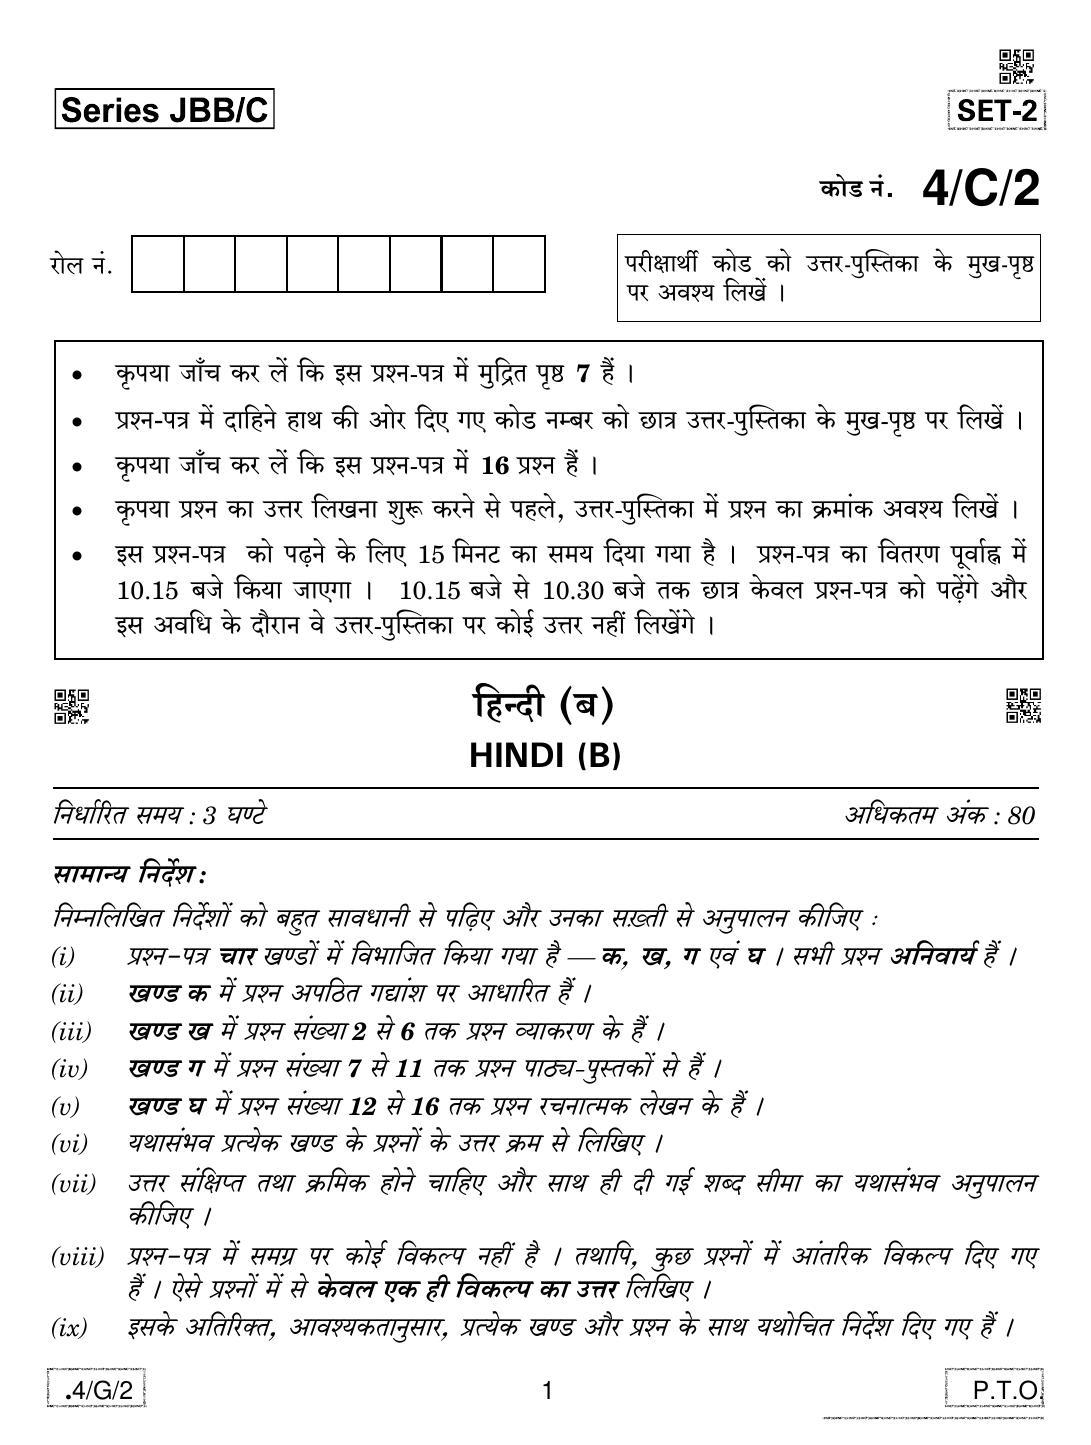 CBSE Class 10 4-C-2 Hindi B 2020 Compartment Question Paper - Page 1